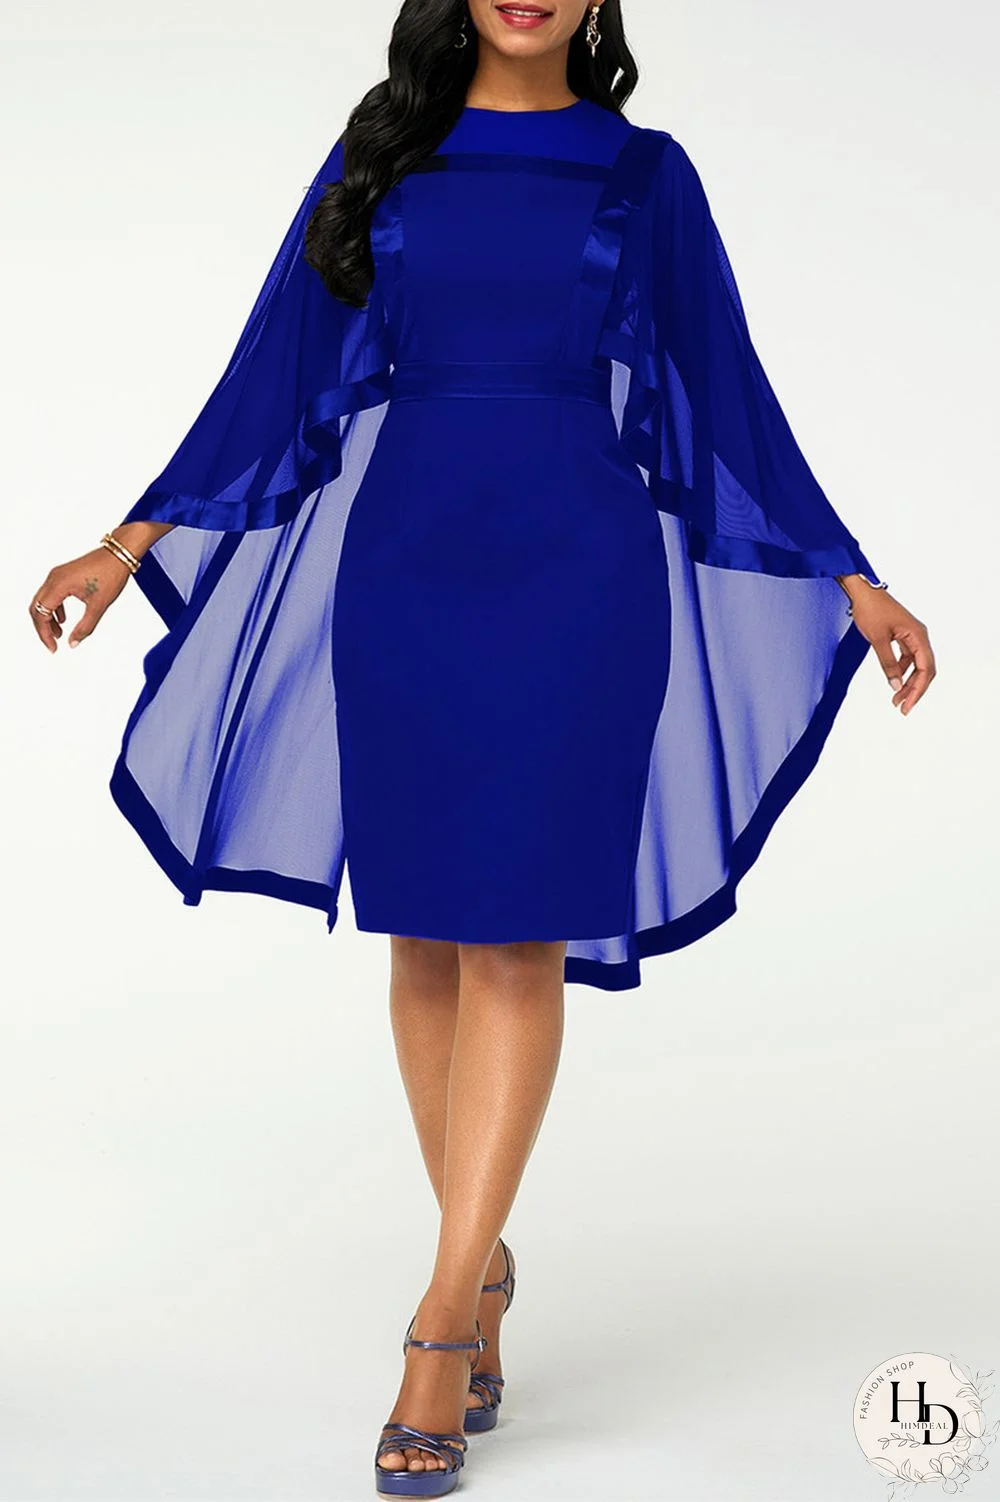 Deep Blue Fashion Casual Solid Split Joint O Neck Evening Dress